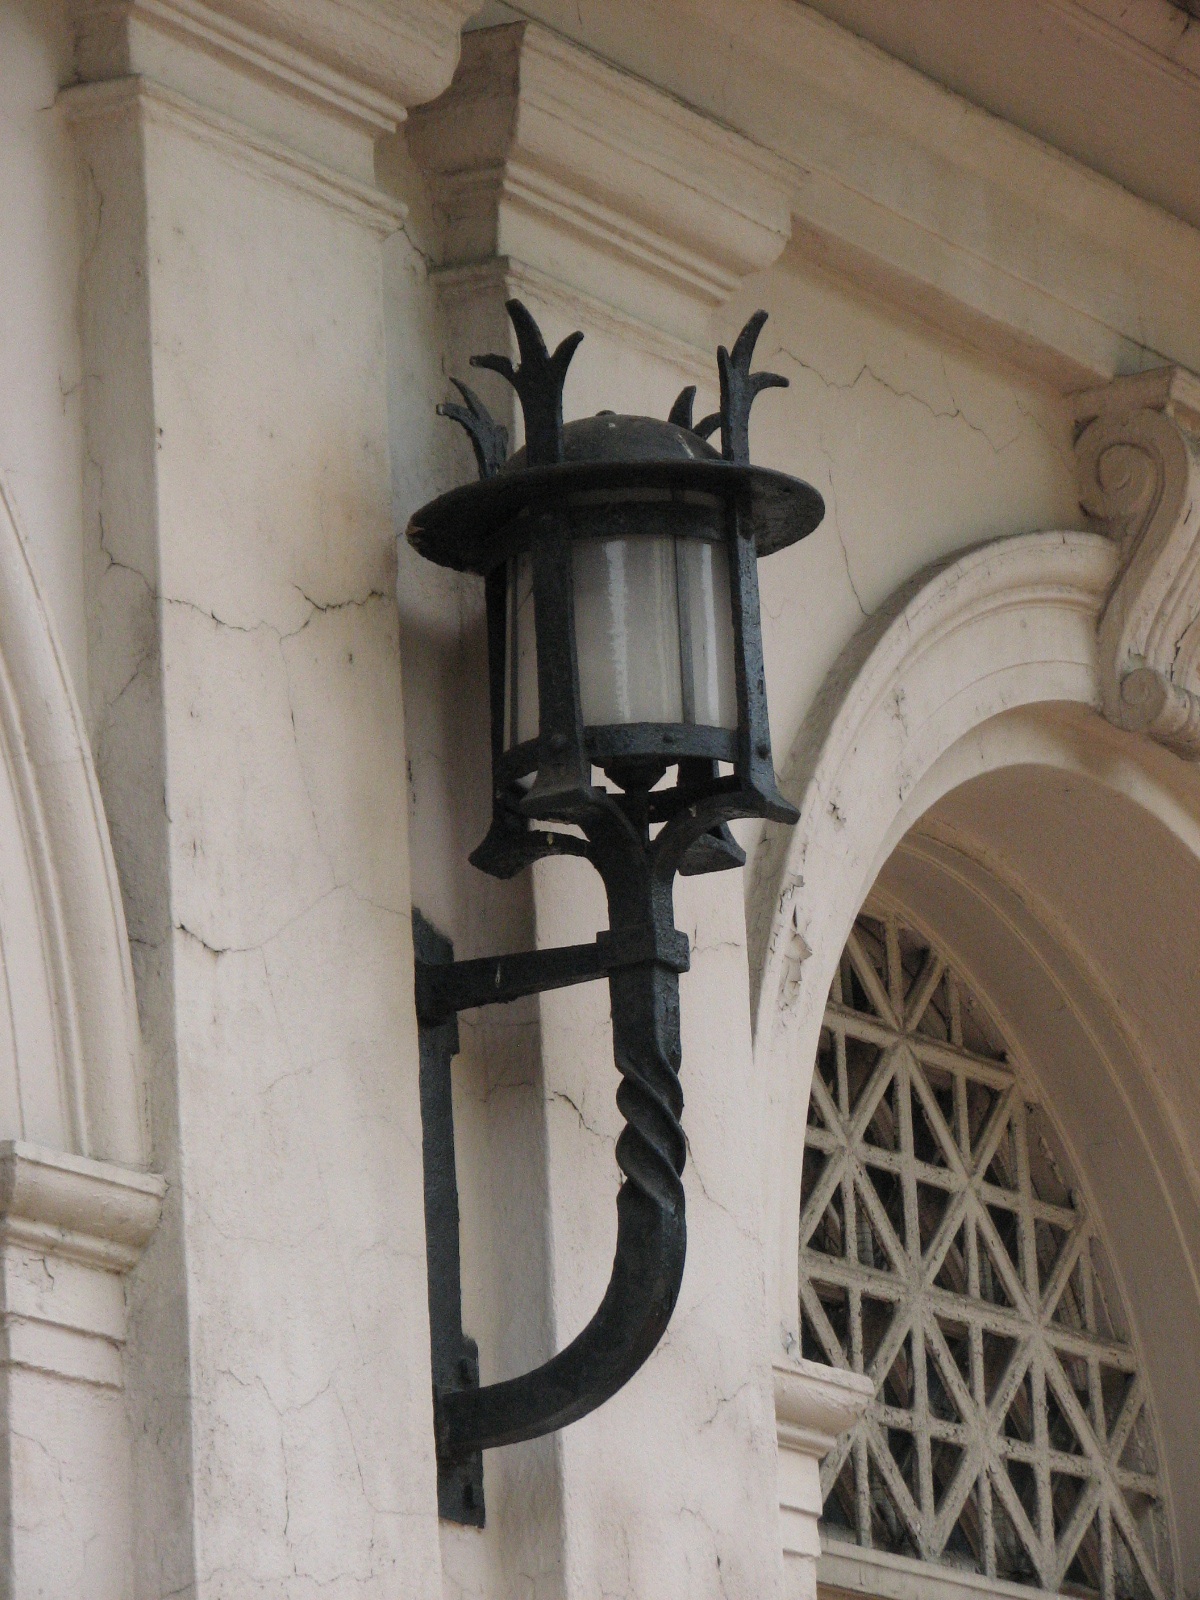 Handsome cast-iron lighting was designed for the exterior and interior of the building.